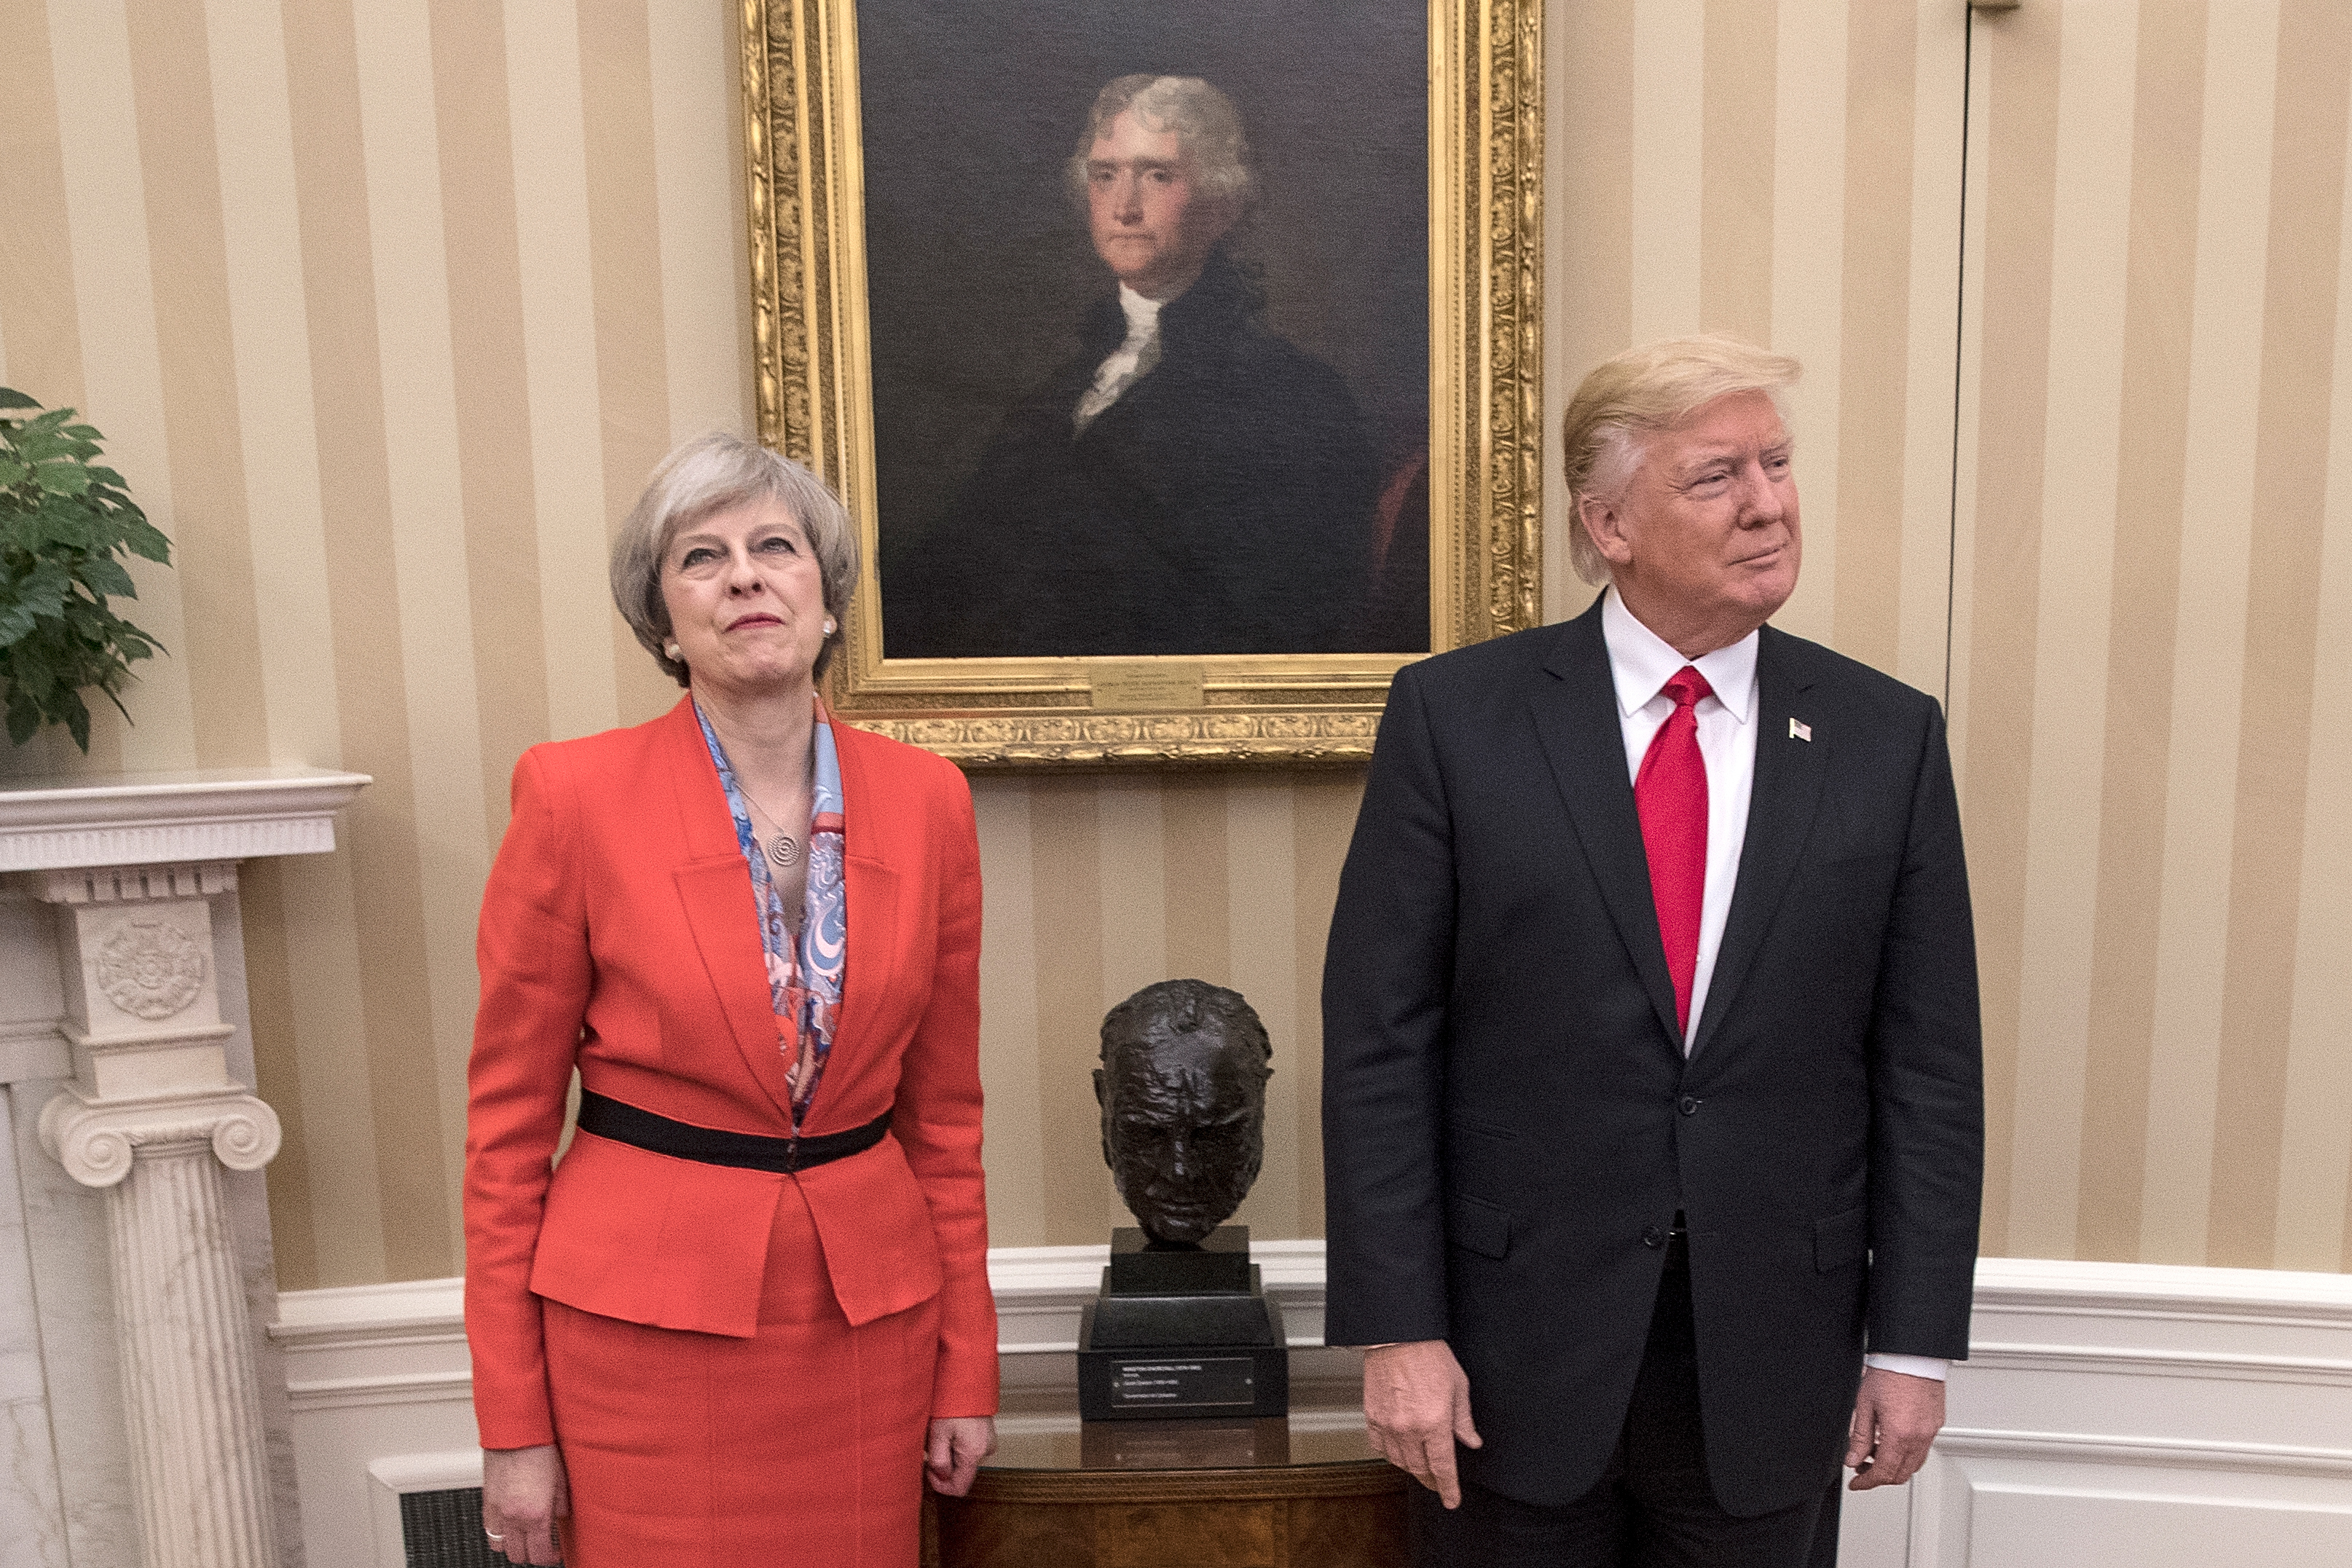 British Prime Minister Theresa May with U.S. President Donald Trump in The Oval Office at The White House on January 27, 2017 in Washington, DC. (Christopher Furlong—Getty Images)